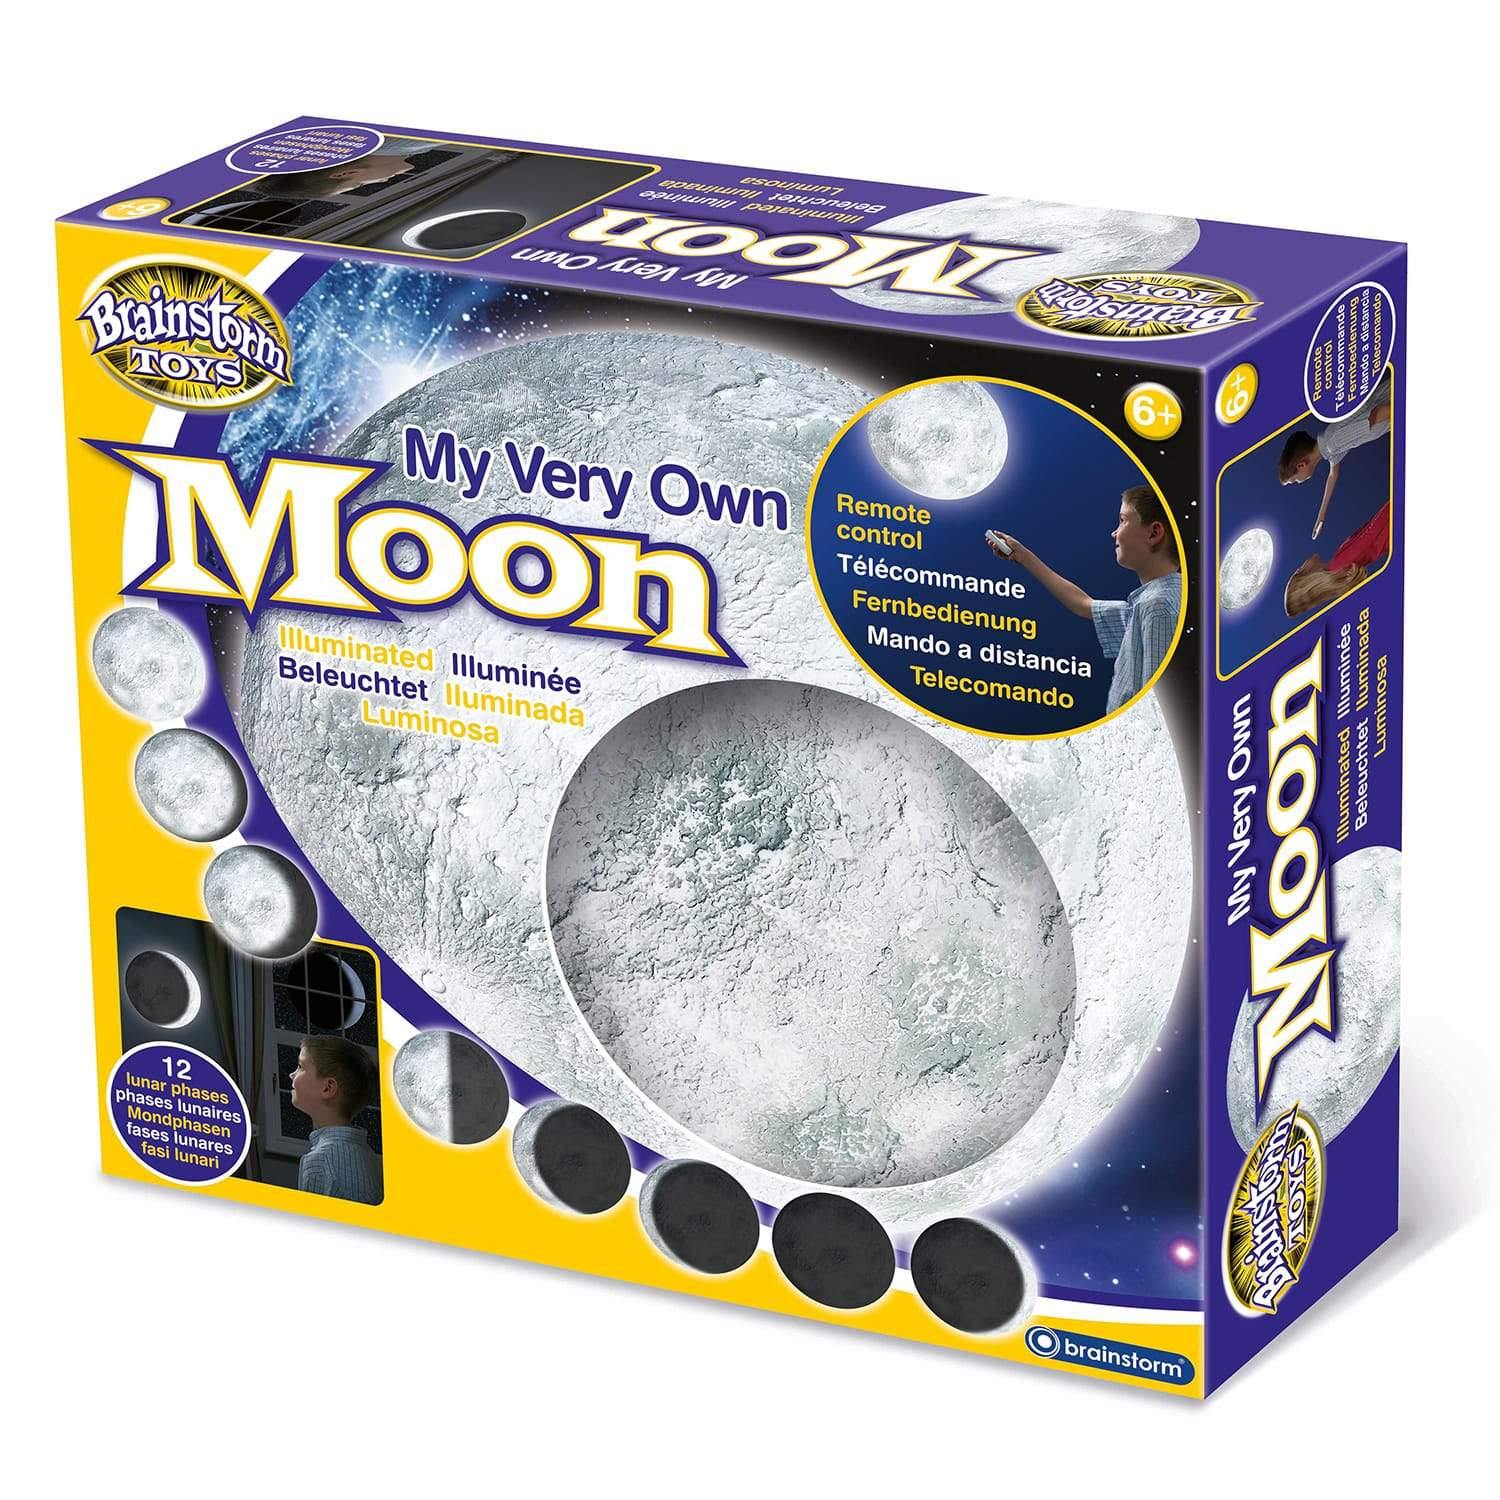 My Very Own Moon light in box